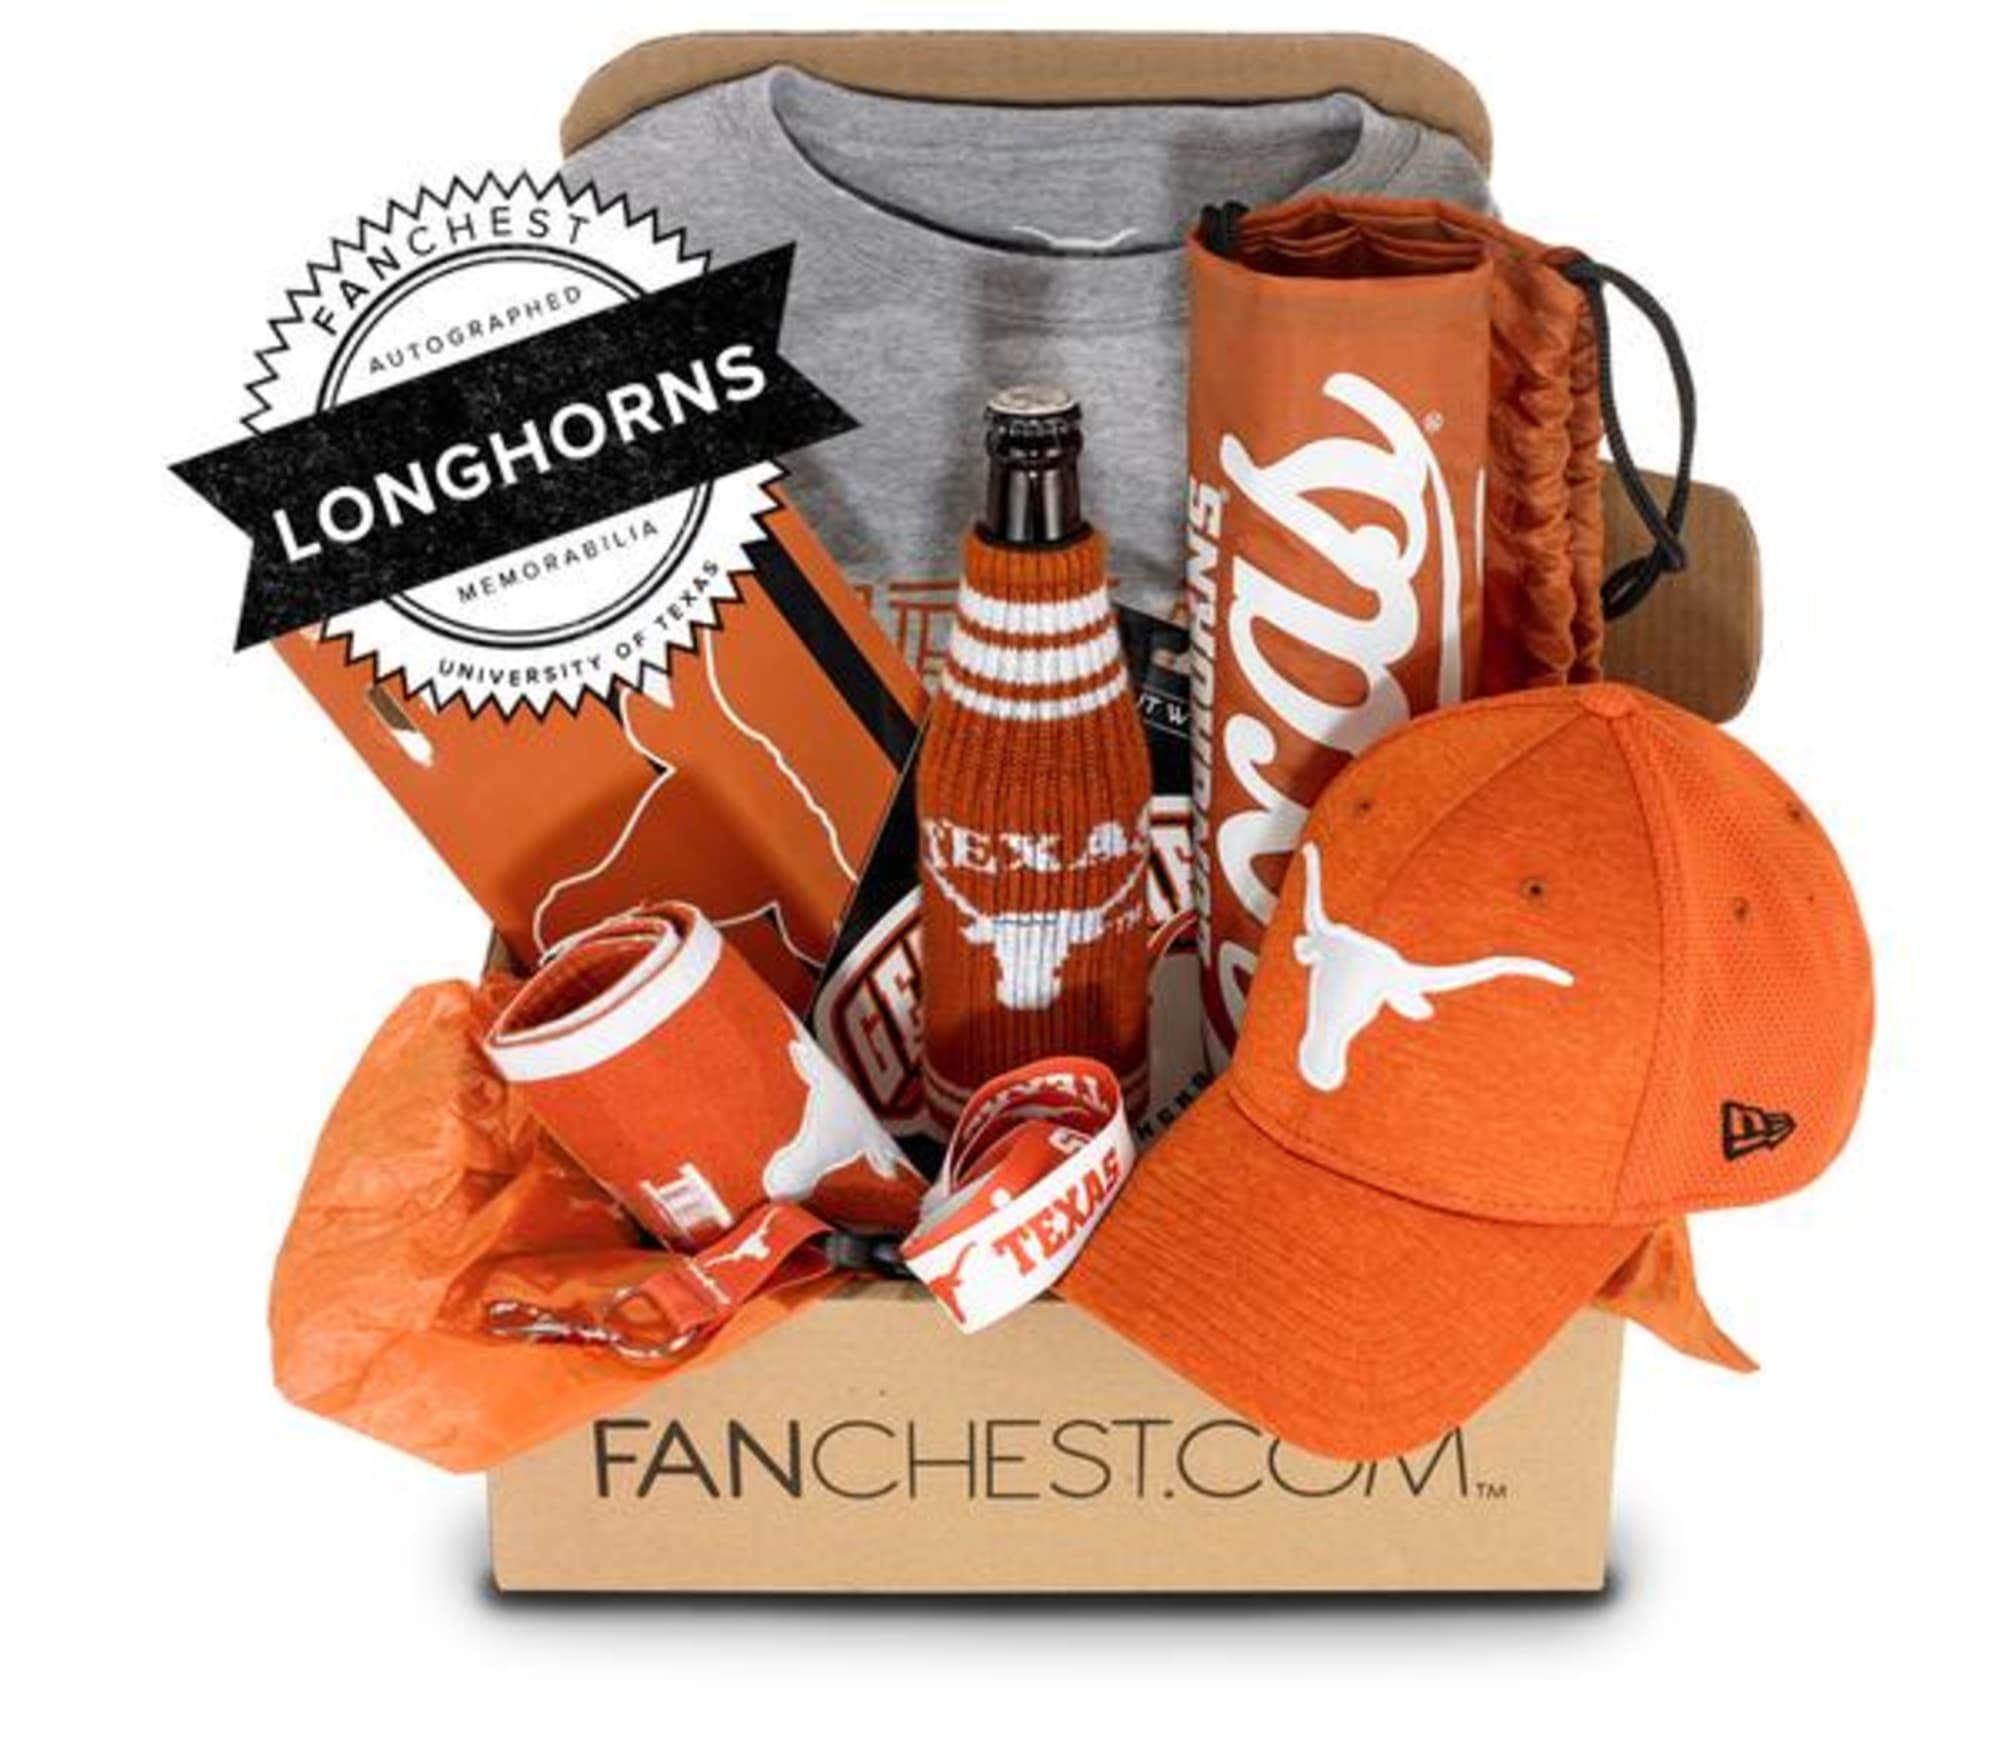 A Texas Longhorns Fanchest is the perfect holiday gift